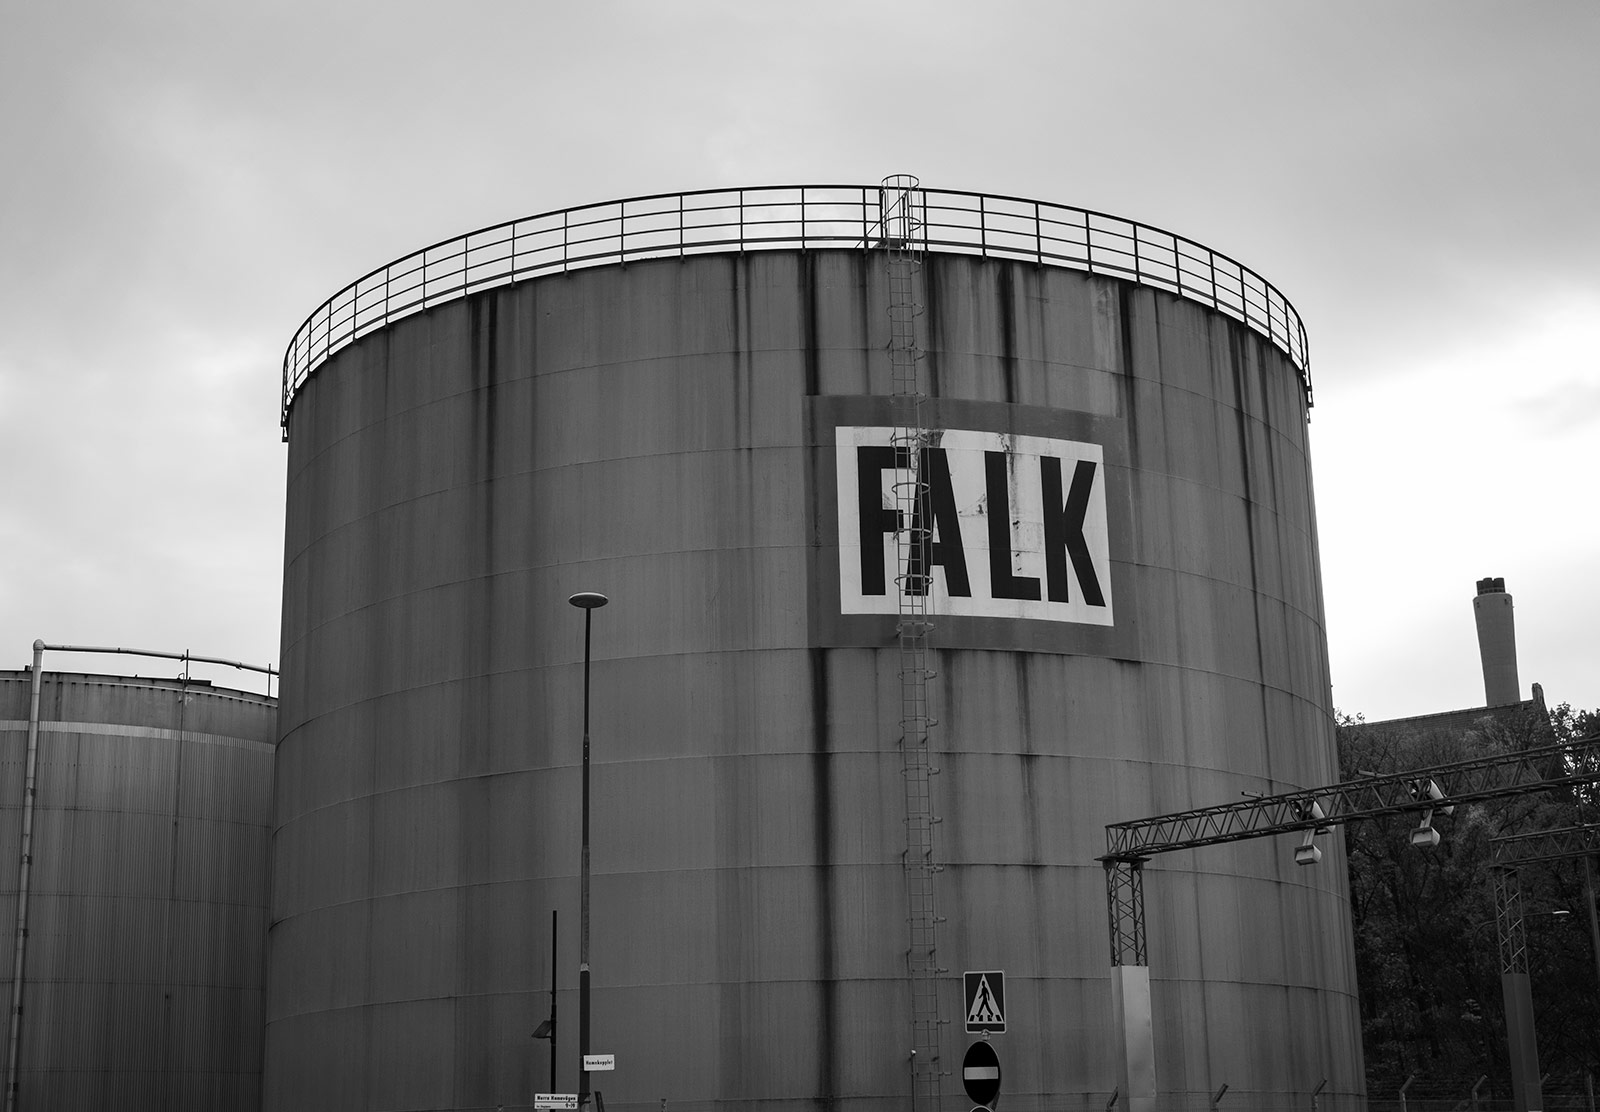 "FALK" sign on tower